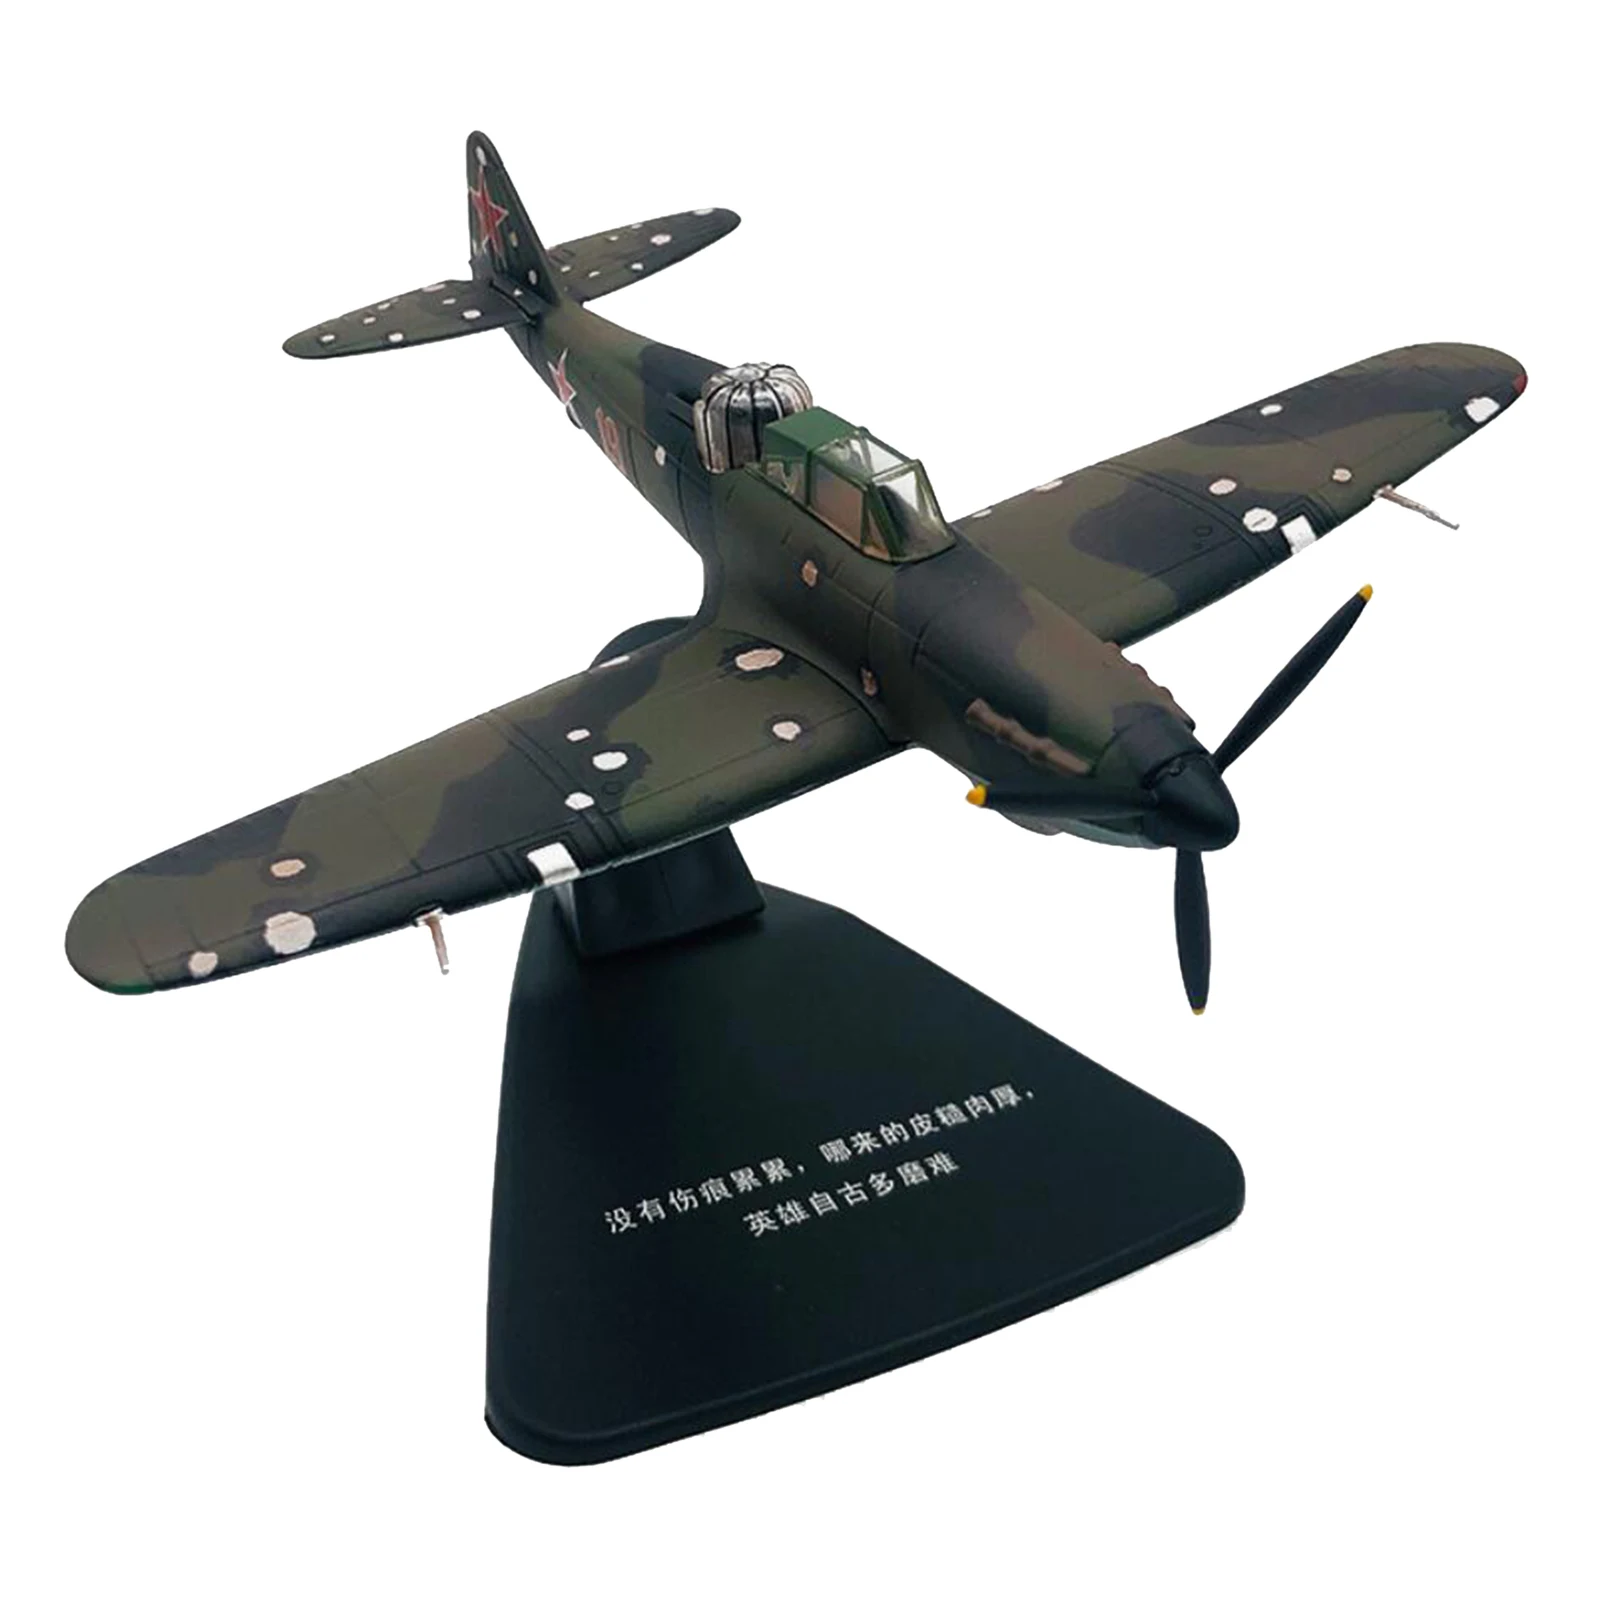 

1/76 Scale Diecast Alloy IL-2 Attacker Aircraft Airforce Diecast Toys Model